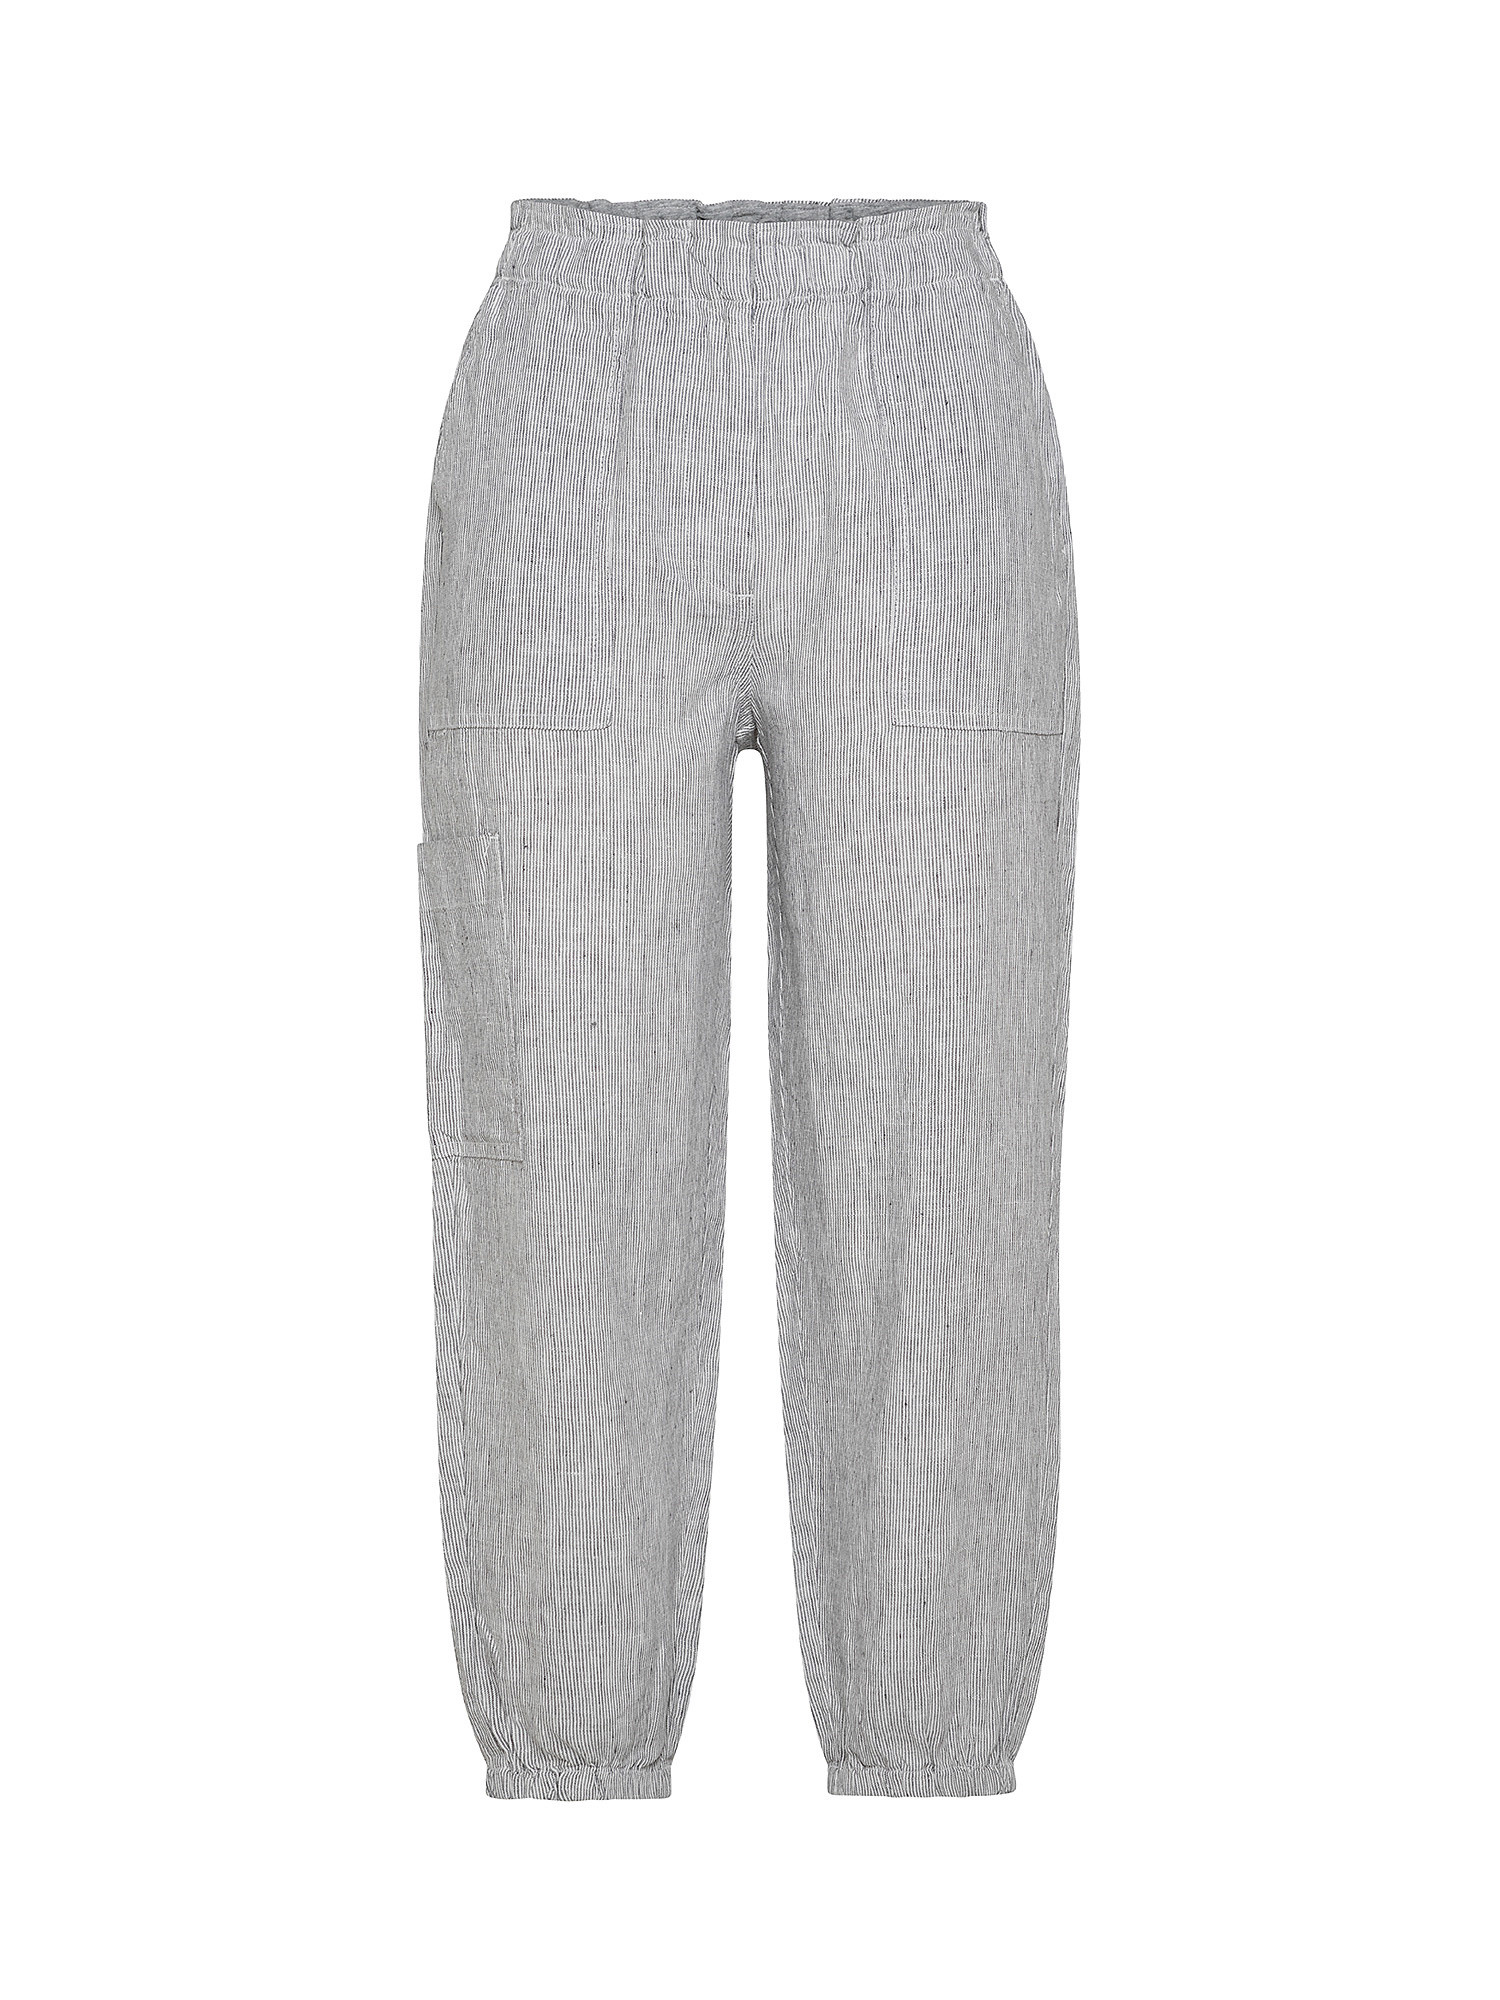 Pantalone jogger a righe, Grigio, large image number 0